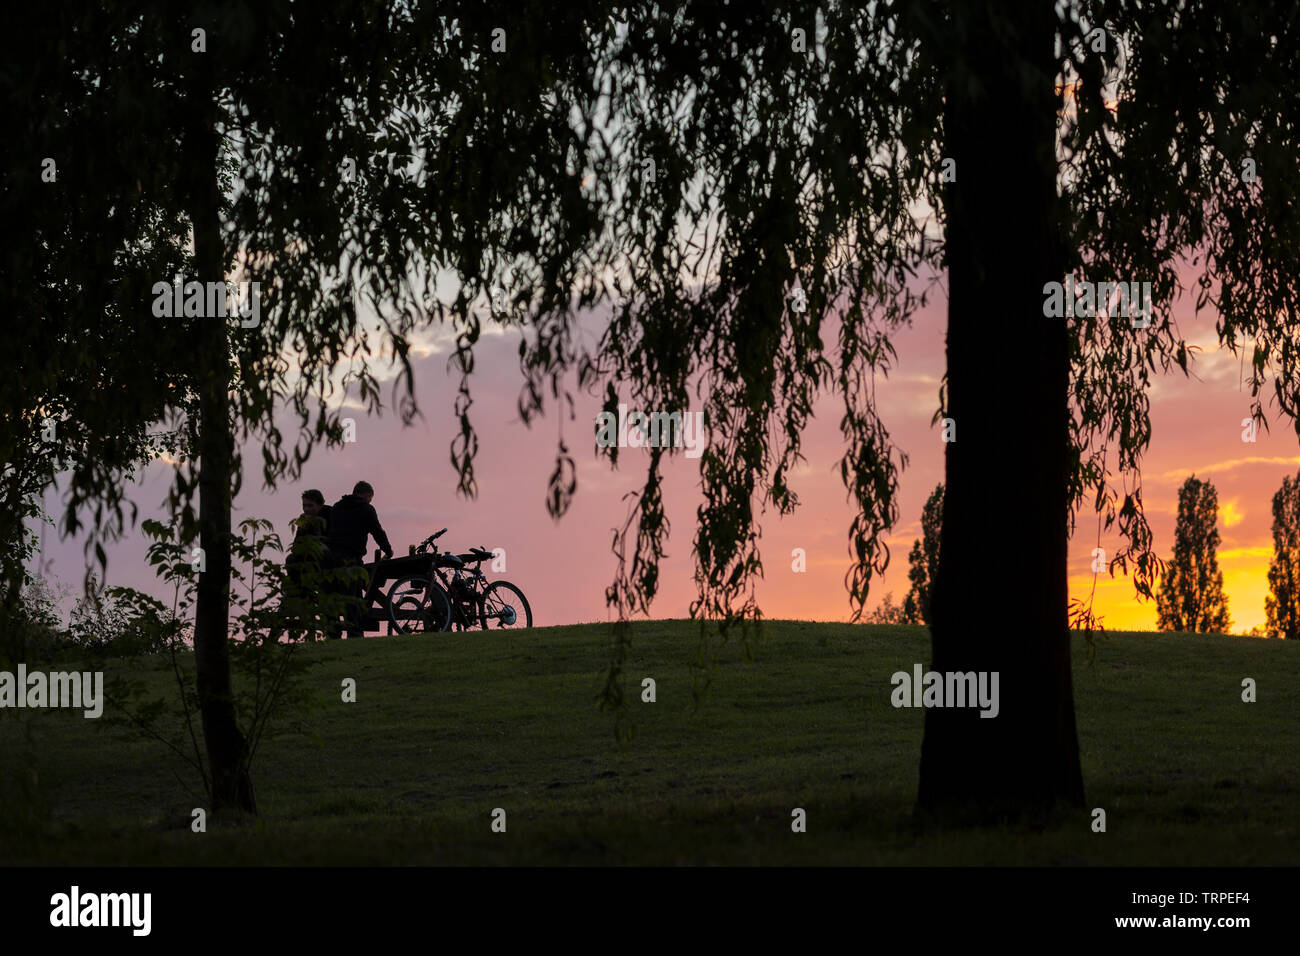 Evening UK landscape at sunset. Two cyclists in silhouette chatting by picnic bench under a silhouetted weeping willow tree outdoors in country park. Stock Photo